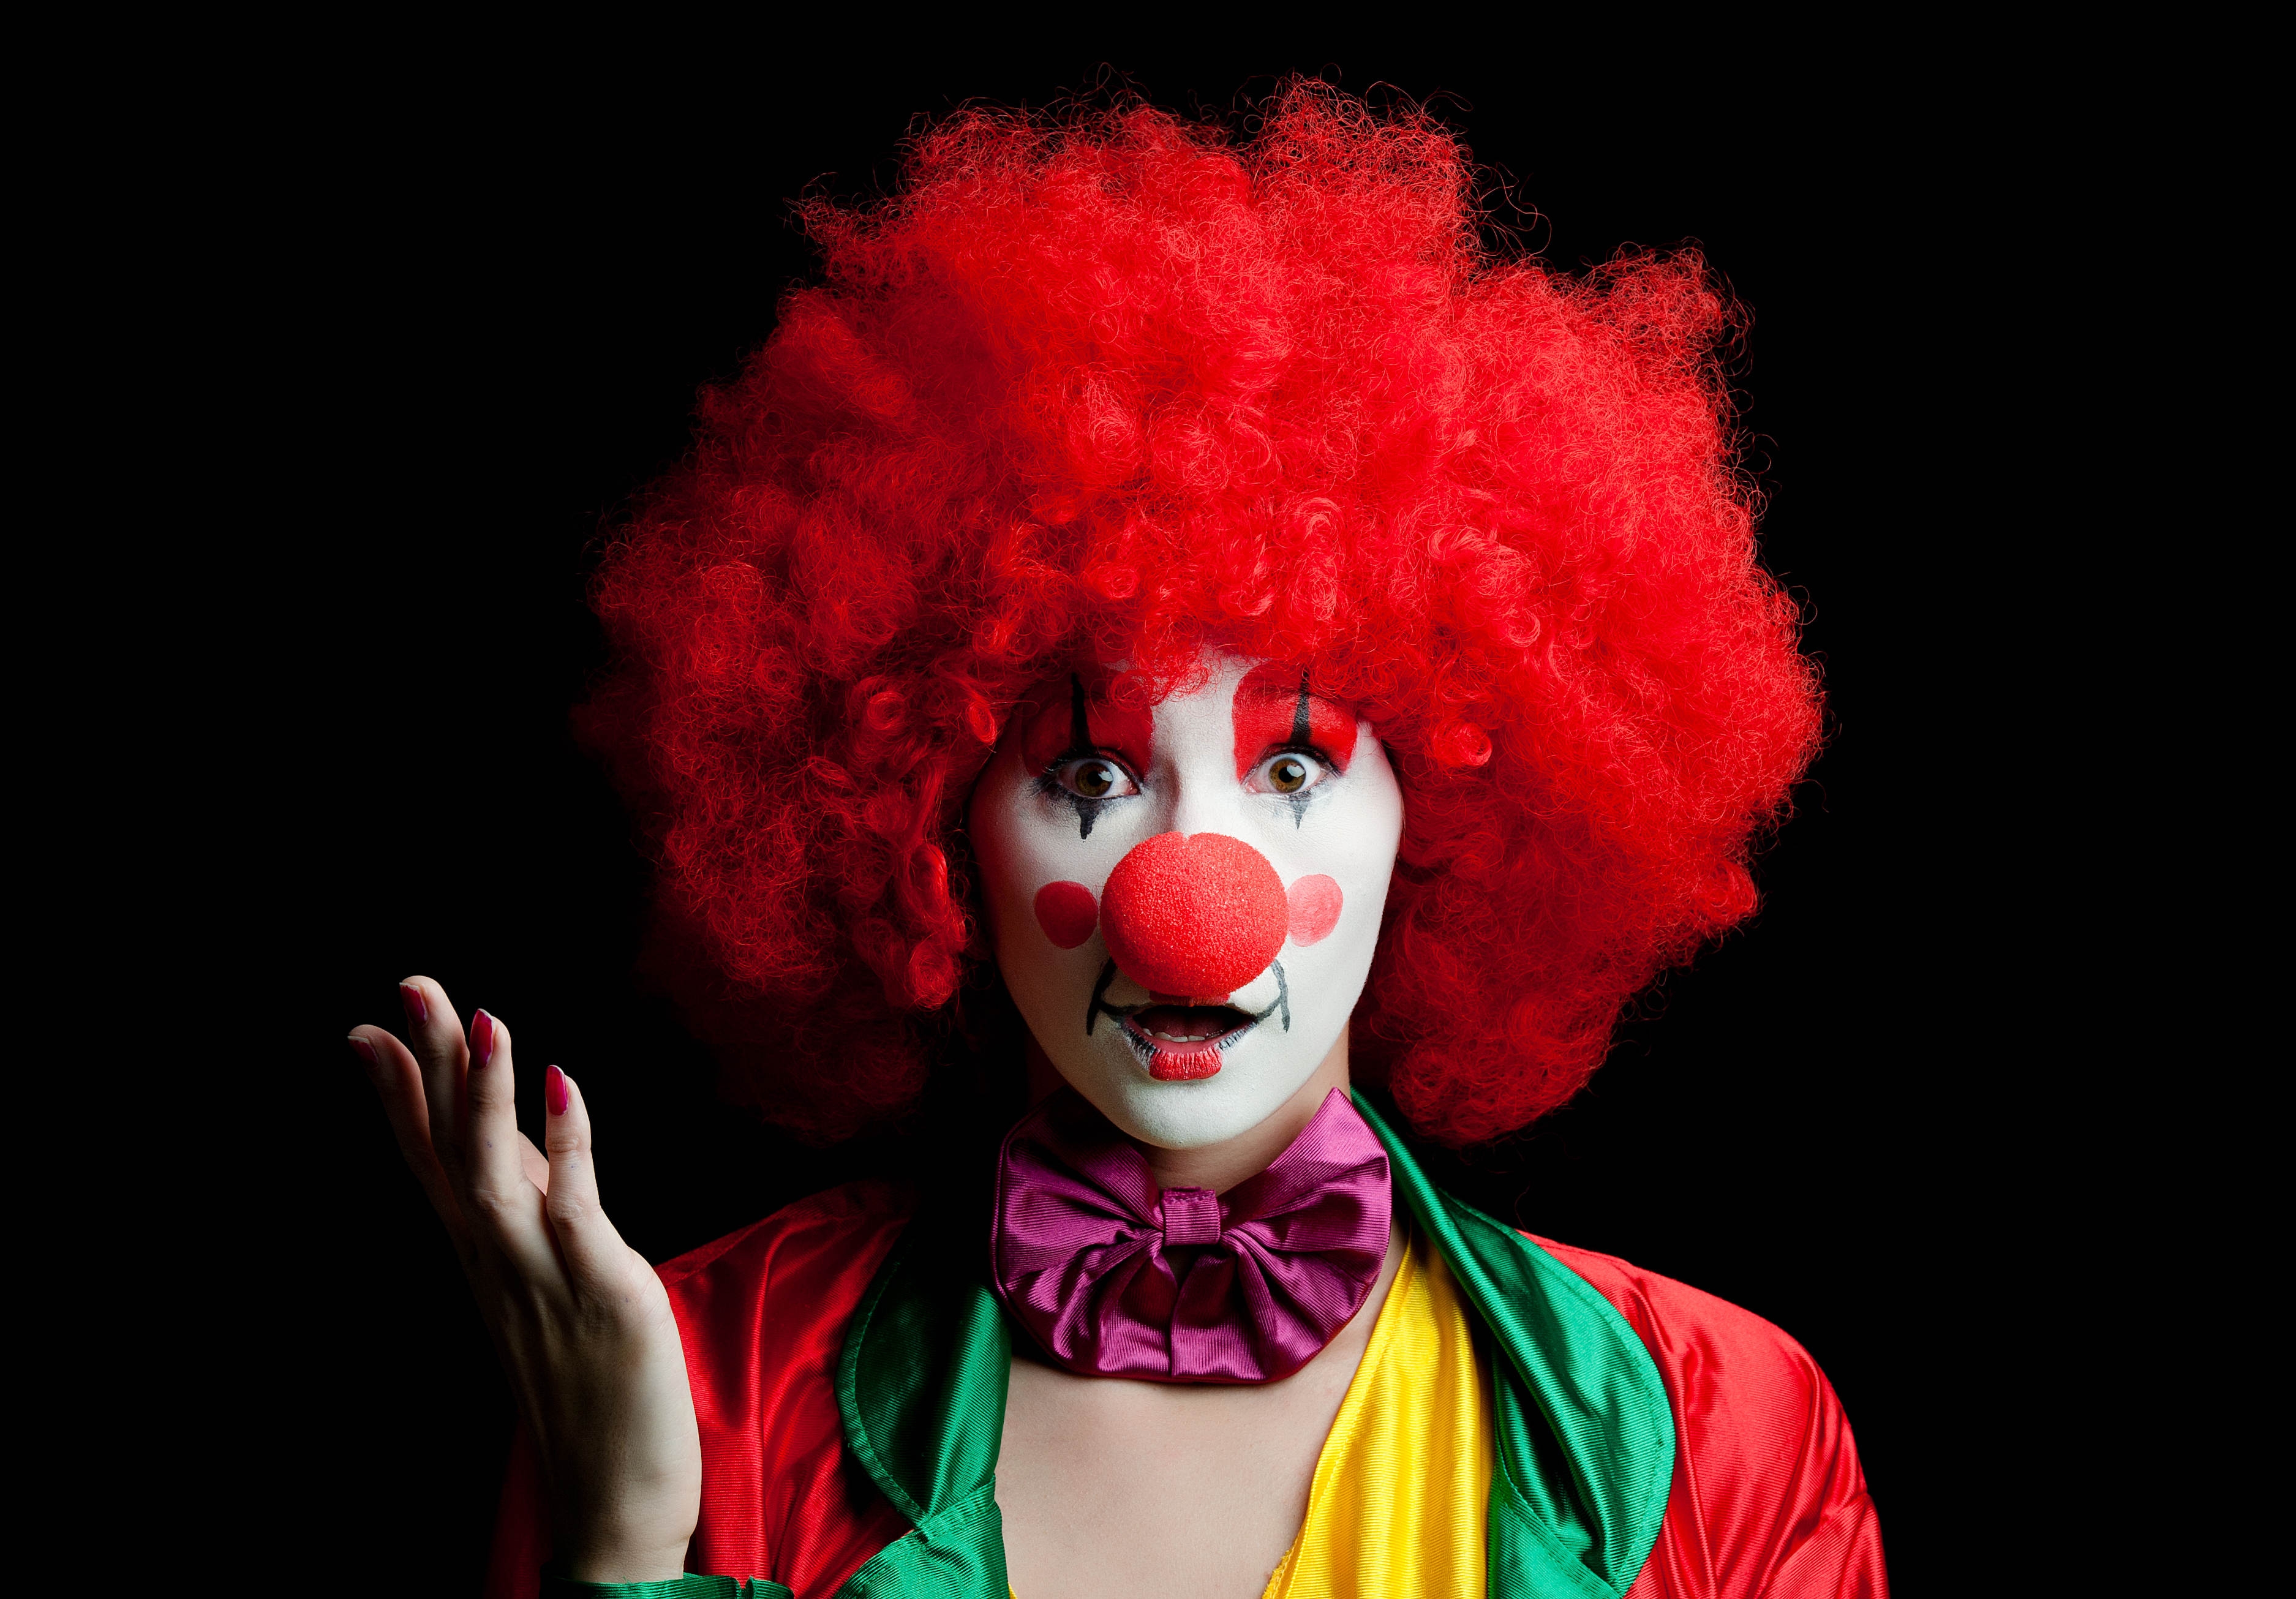 Wallpapers red hair clown black background on the desktop